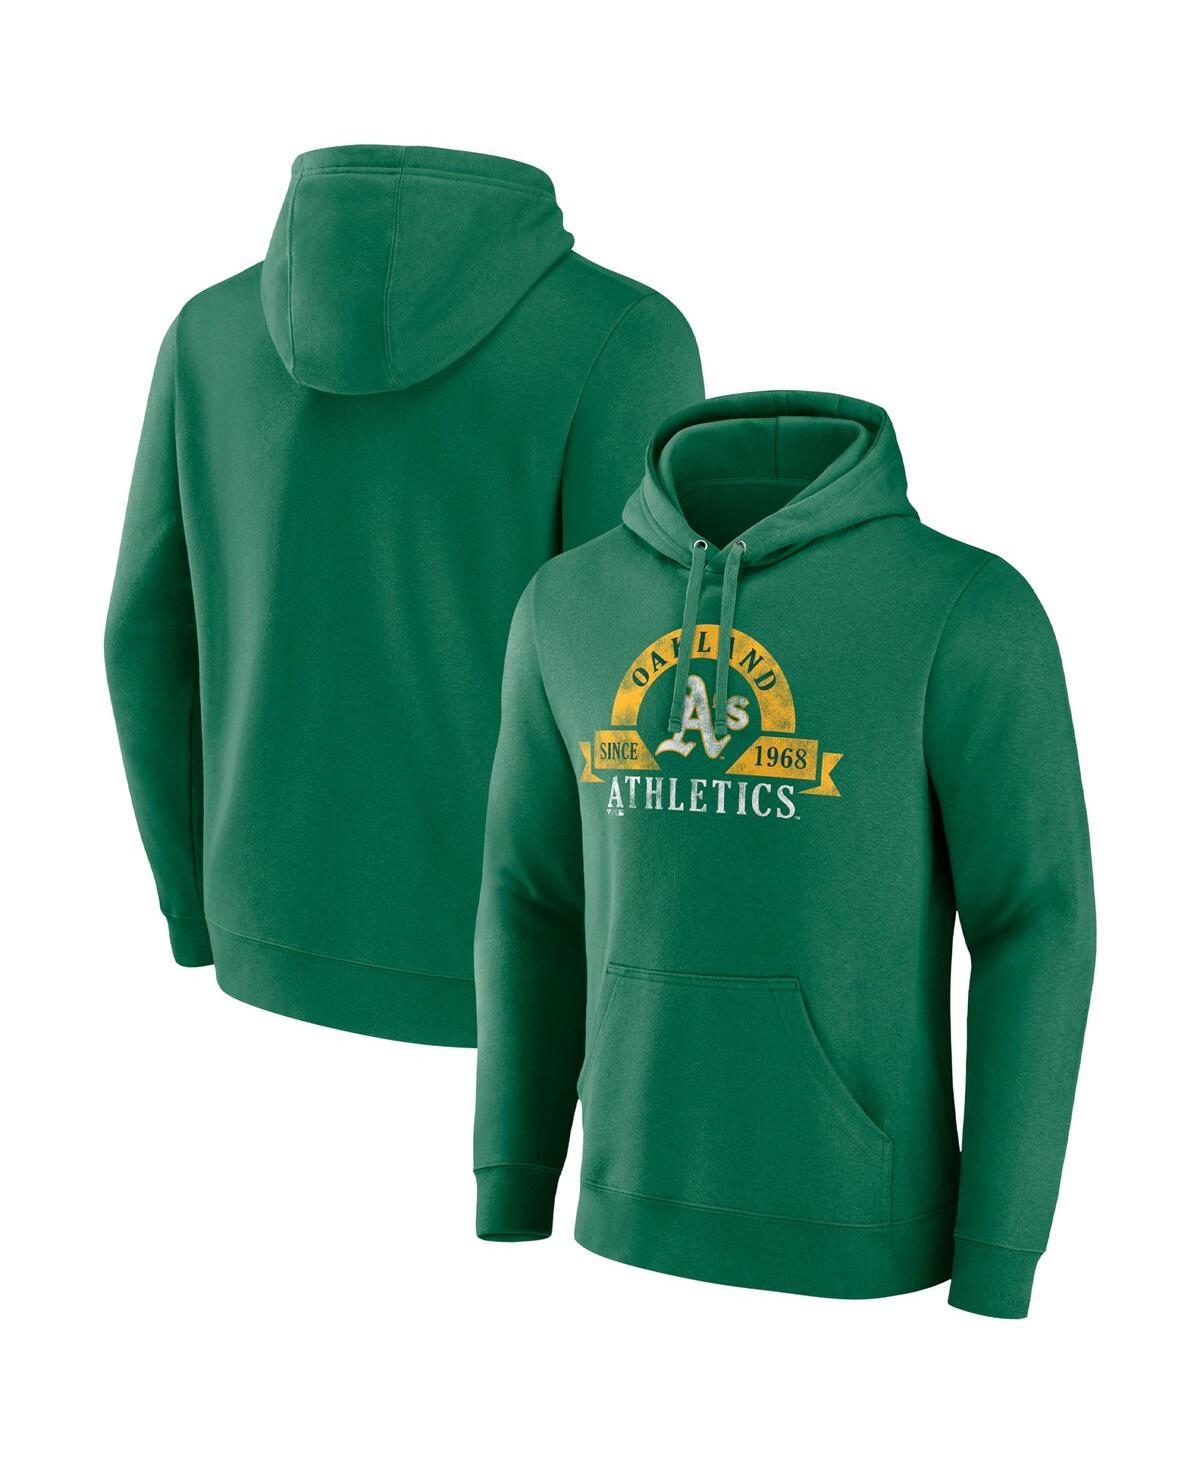 Men's Majestic Kelly Green Oakland Athletics Utility Pullover Hoodie - Kelly Green